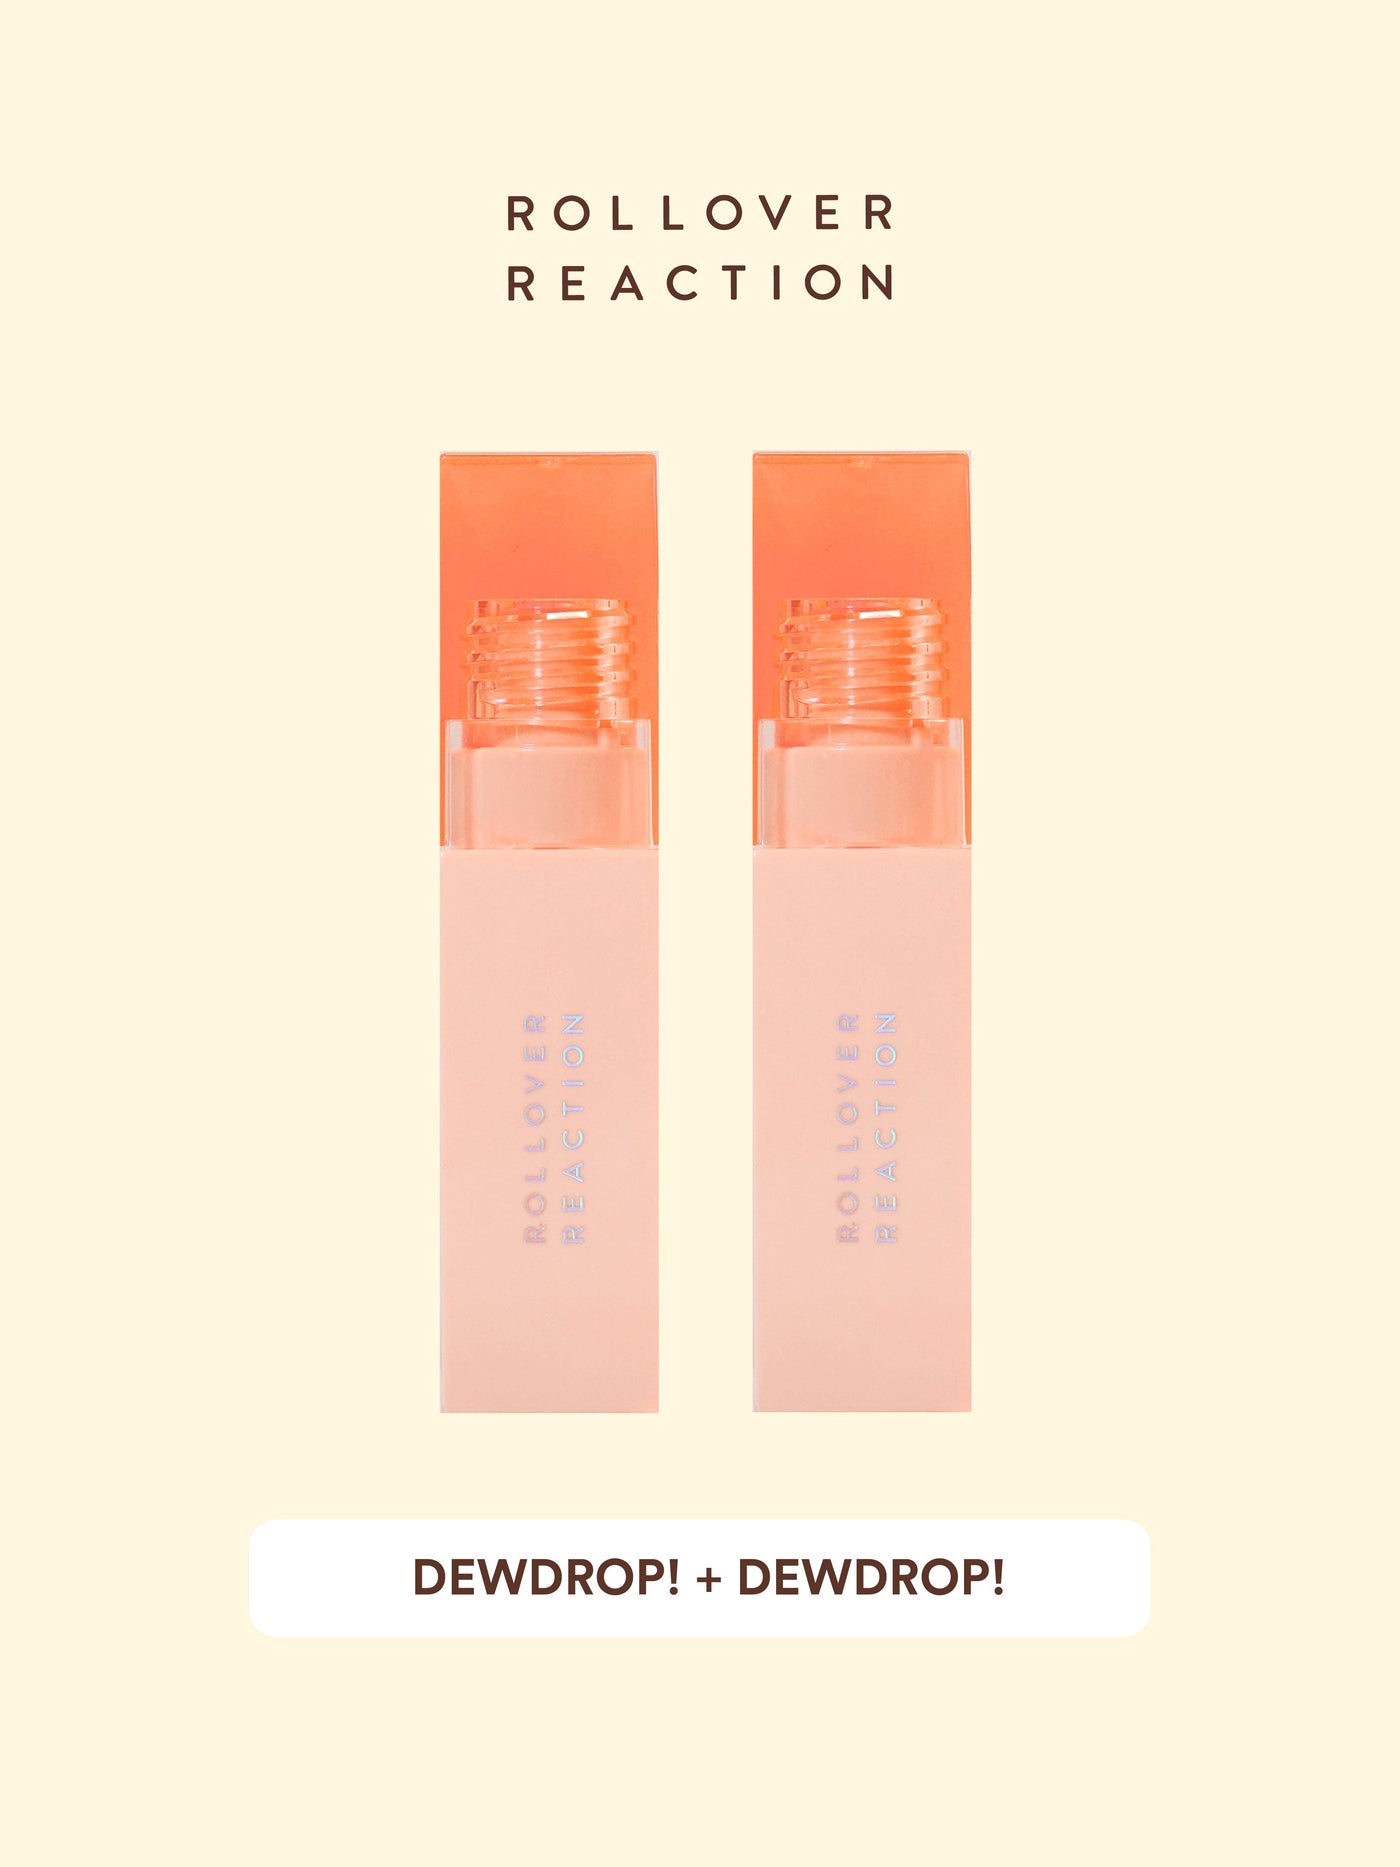 DOUBLE DEWDROP! LIP AND CHEEK TINT